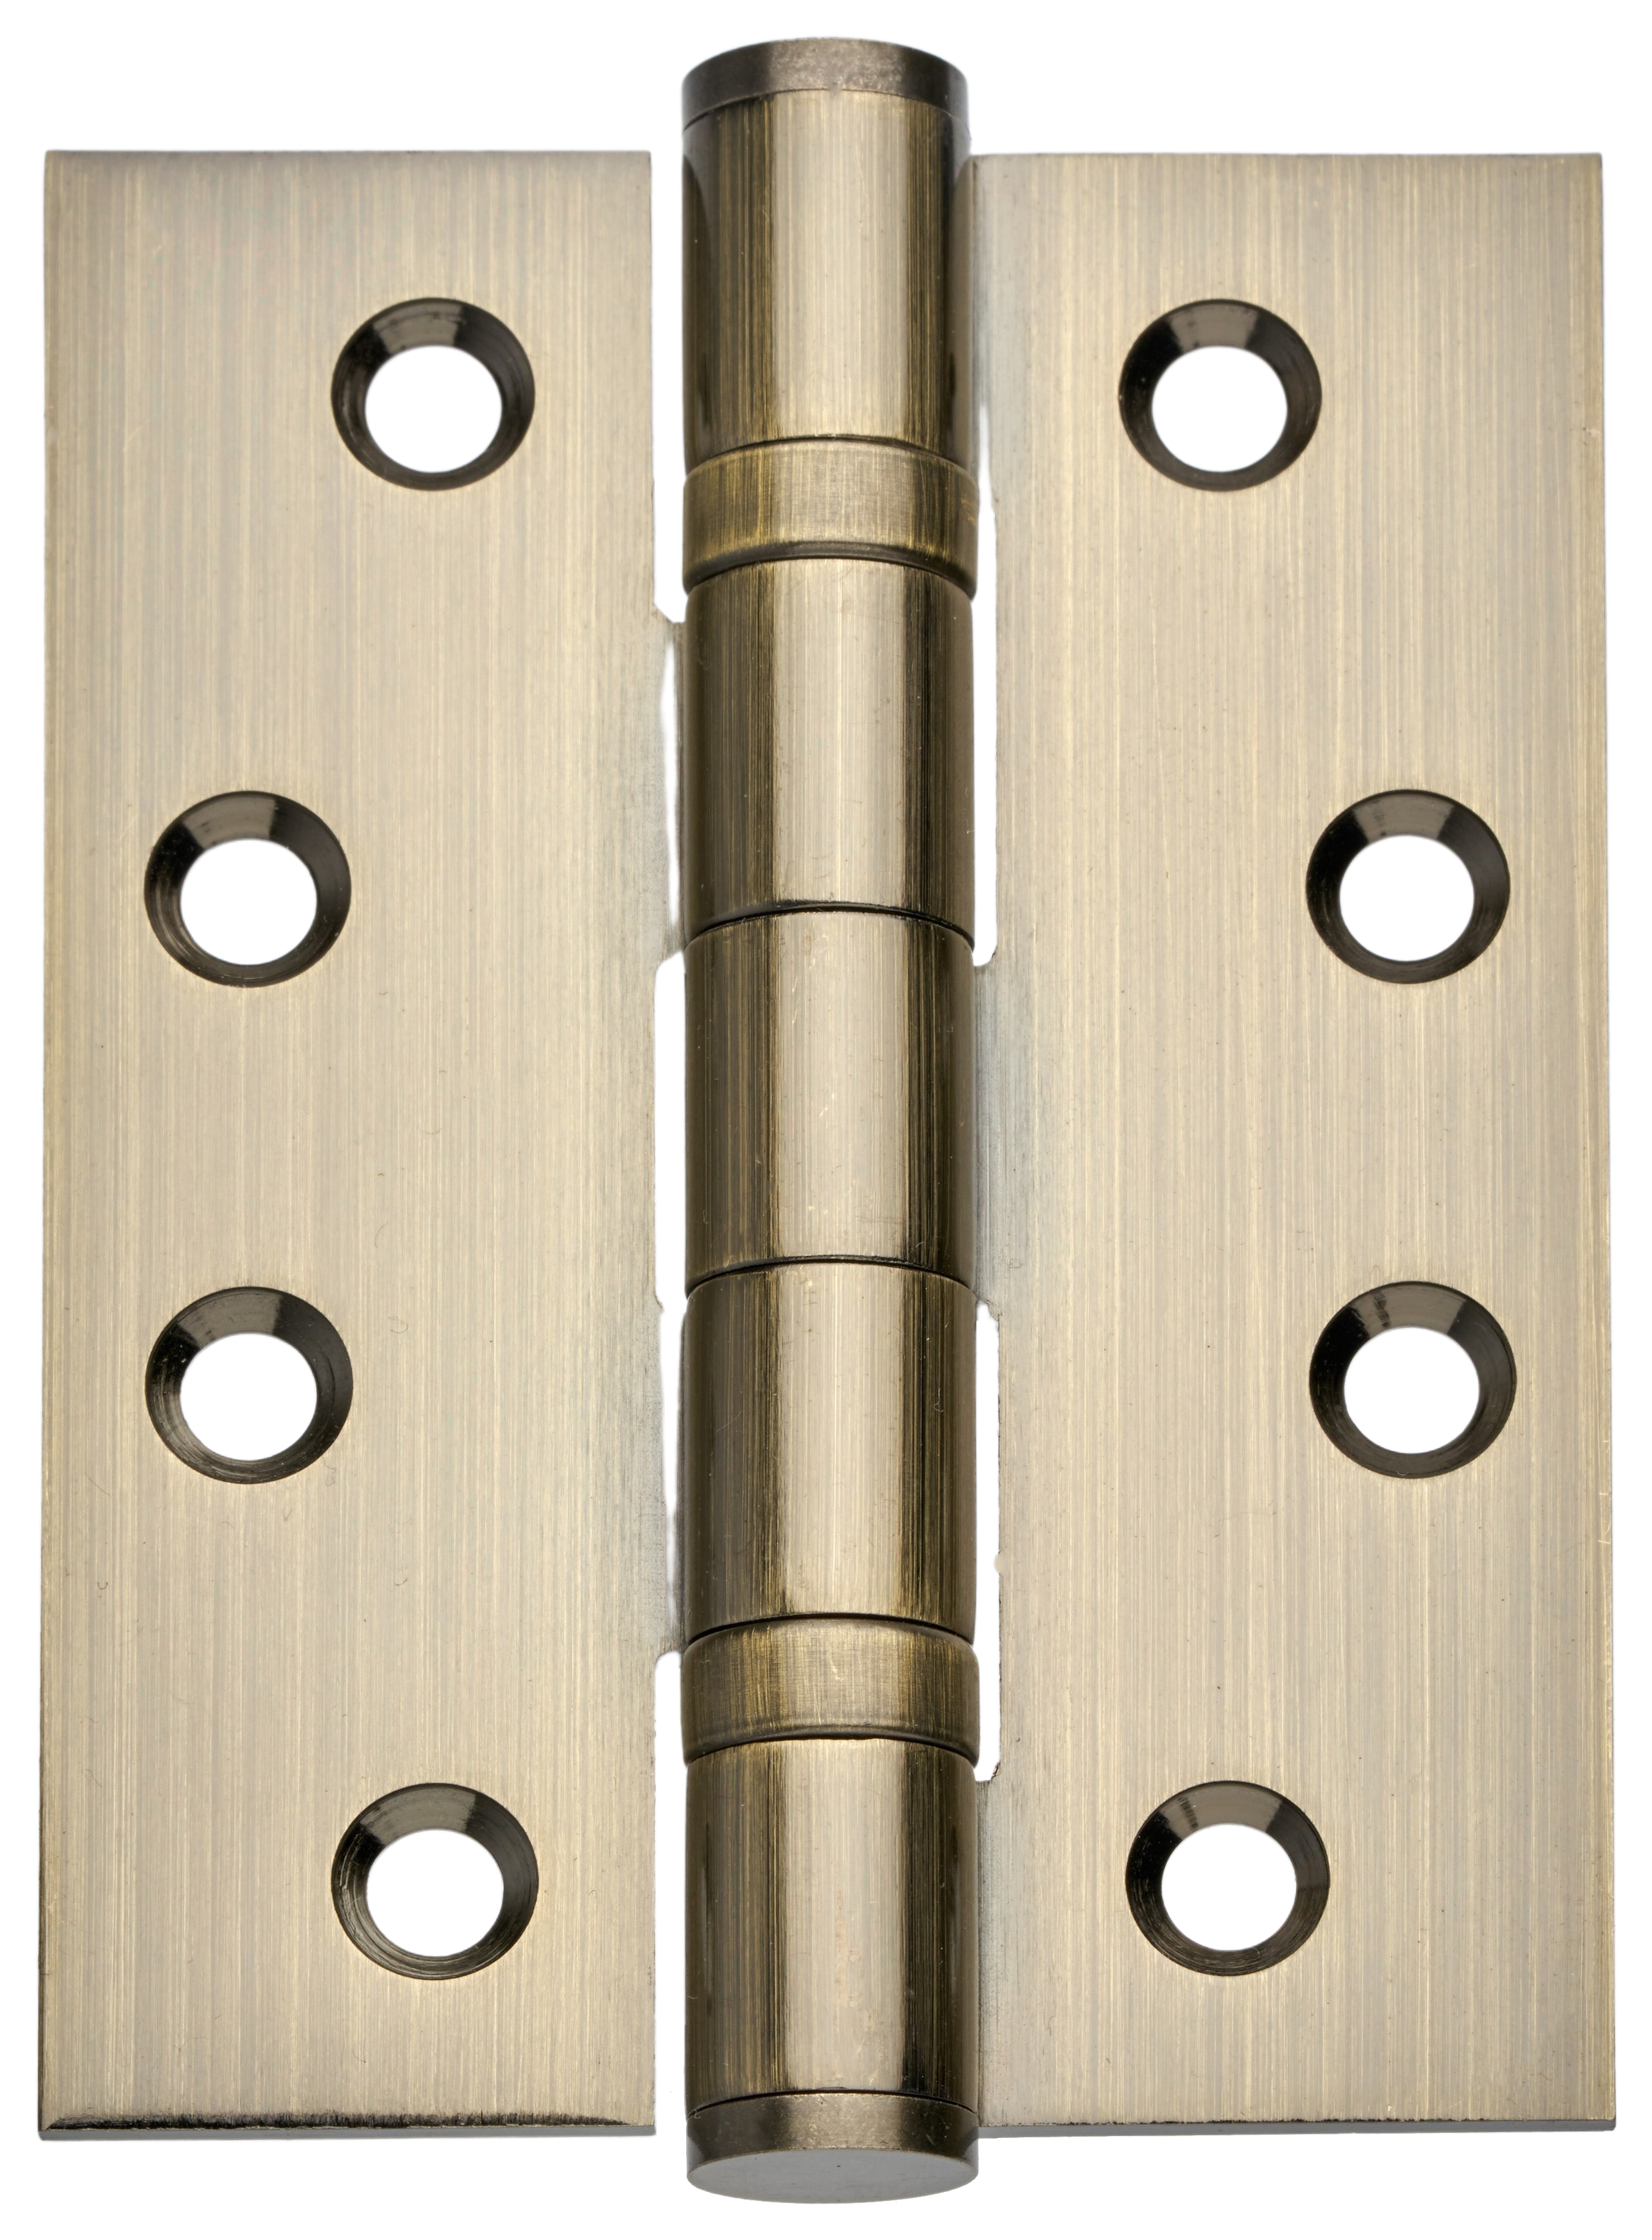 Image of Ball Bearing Hinge Stainless Steel Antique Brass 102mm - Pack of 3